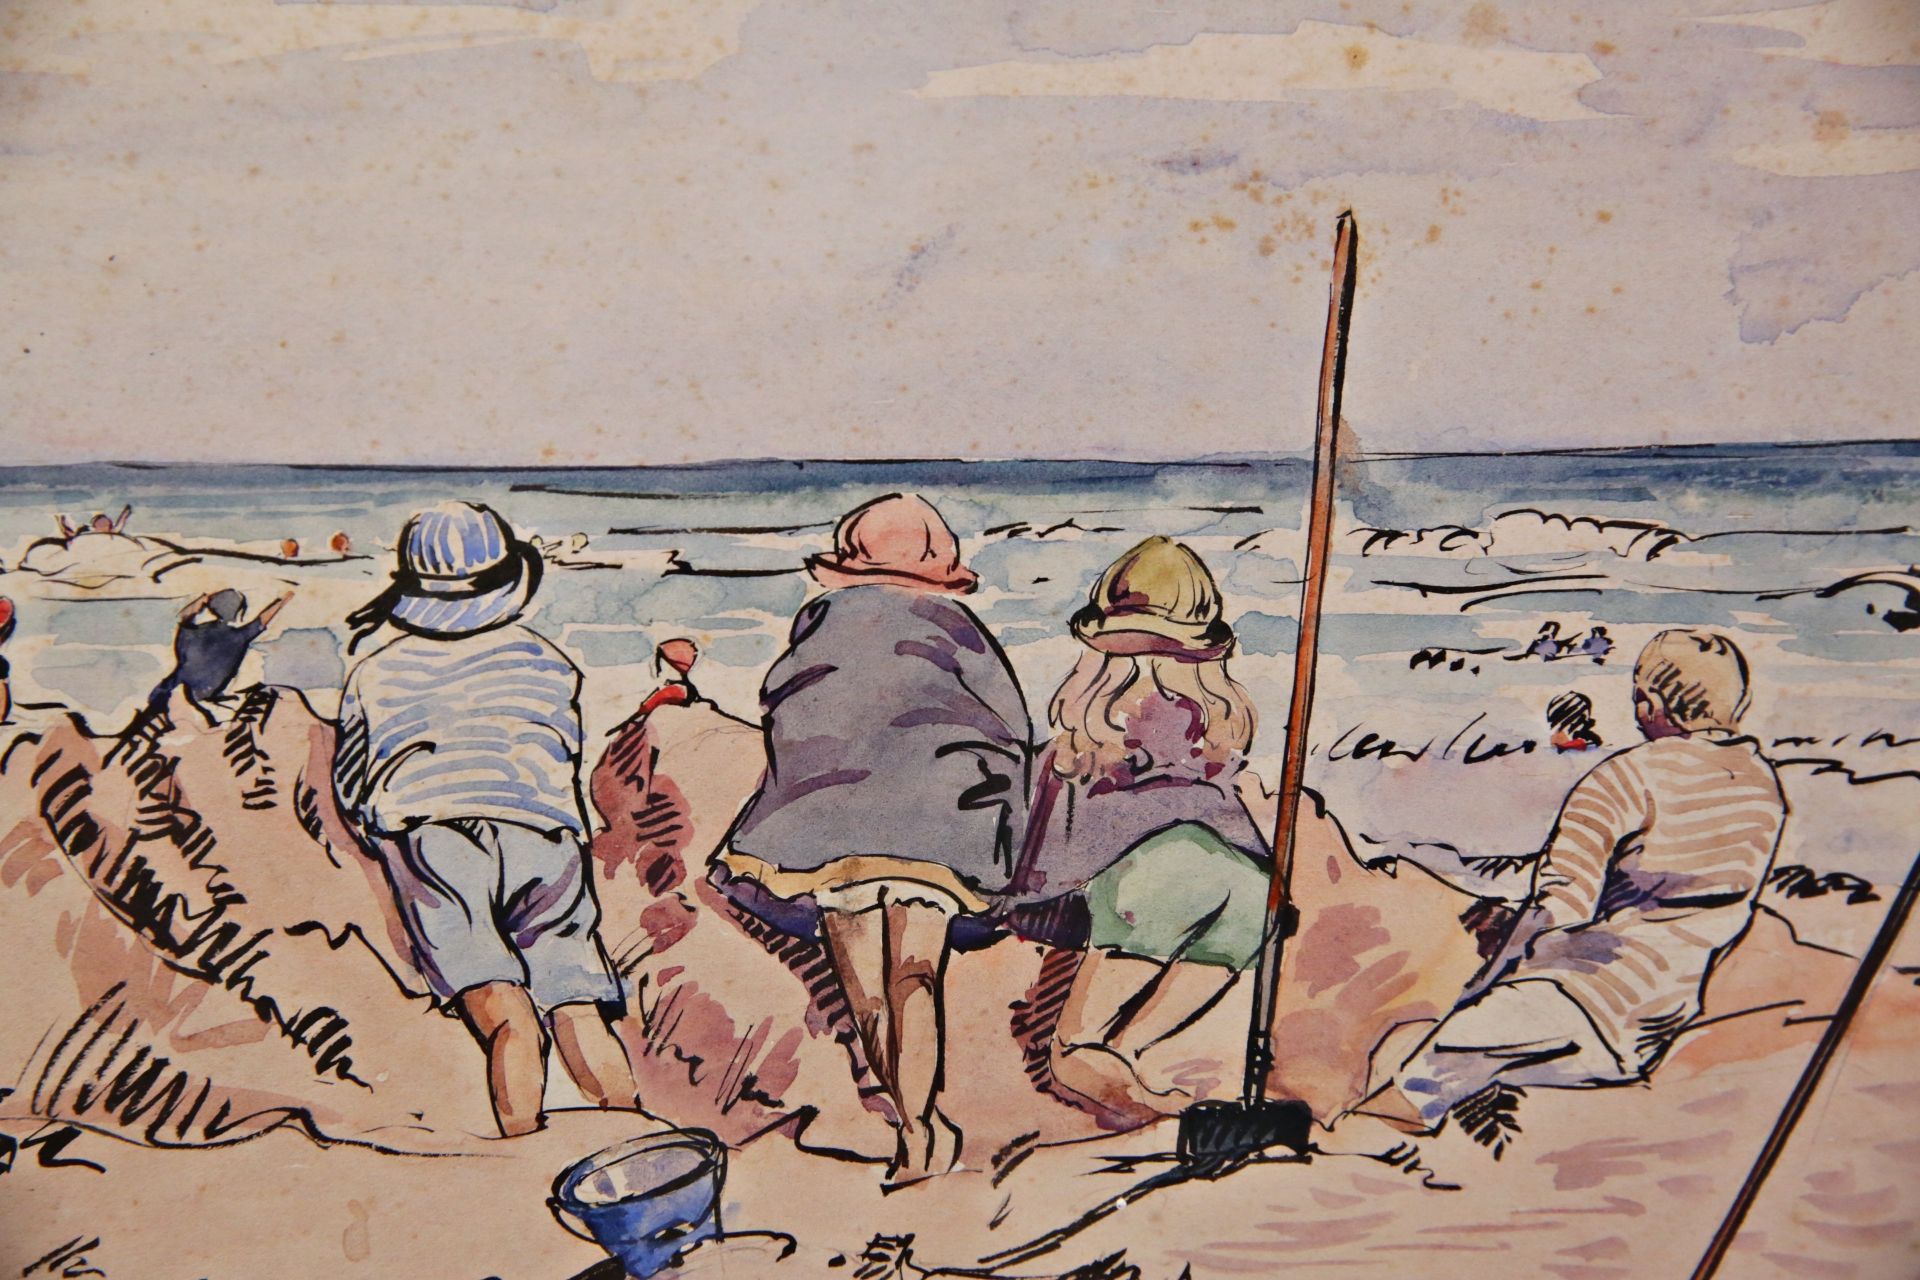 Leon HAUDEVILLE (1885-1969) "Children at the beach", watercolor on paper, French painting, 20th _. - Image 4 of 5